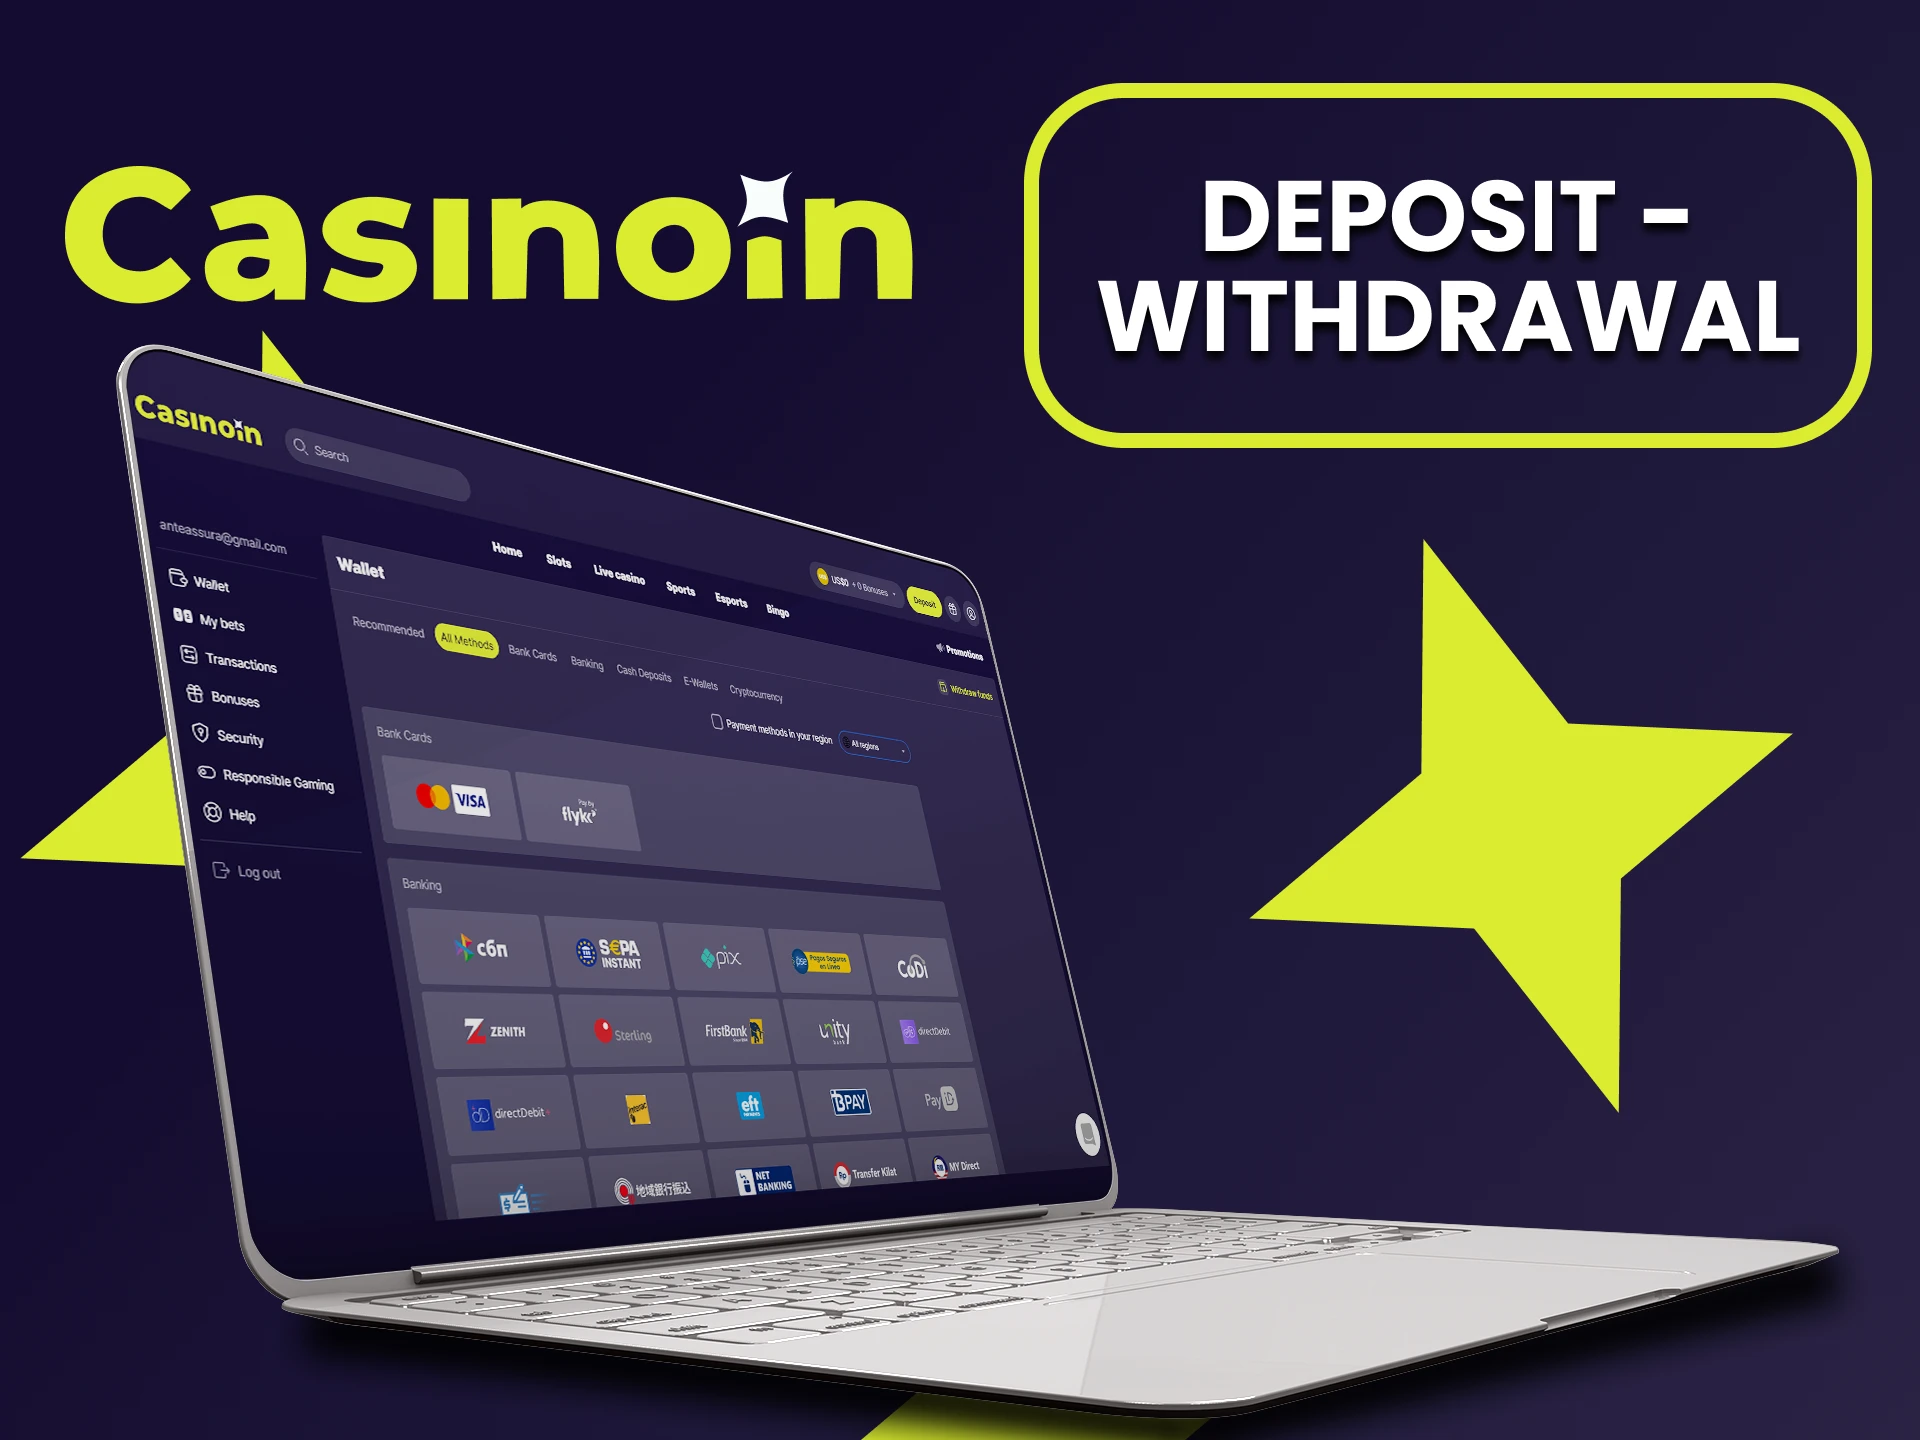 Learn about deposit and withdrawal methods at Casinoin.